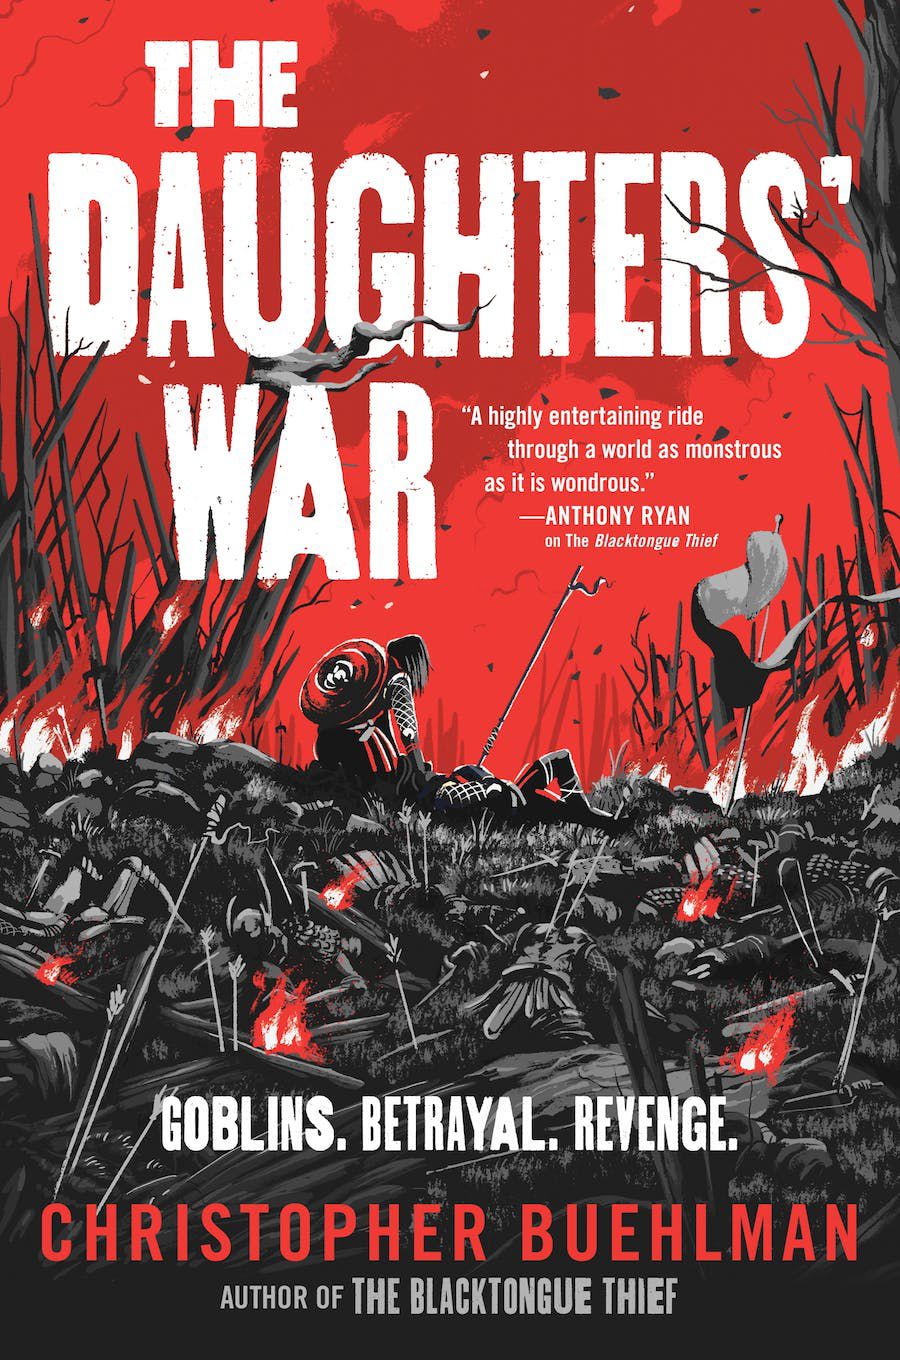 A slumped over figure crawls along a pile of bodies in a red cover for Christopher Buehlman’s The Daughters’ War.